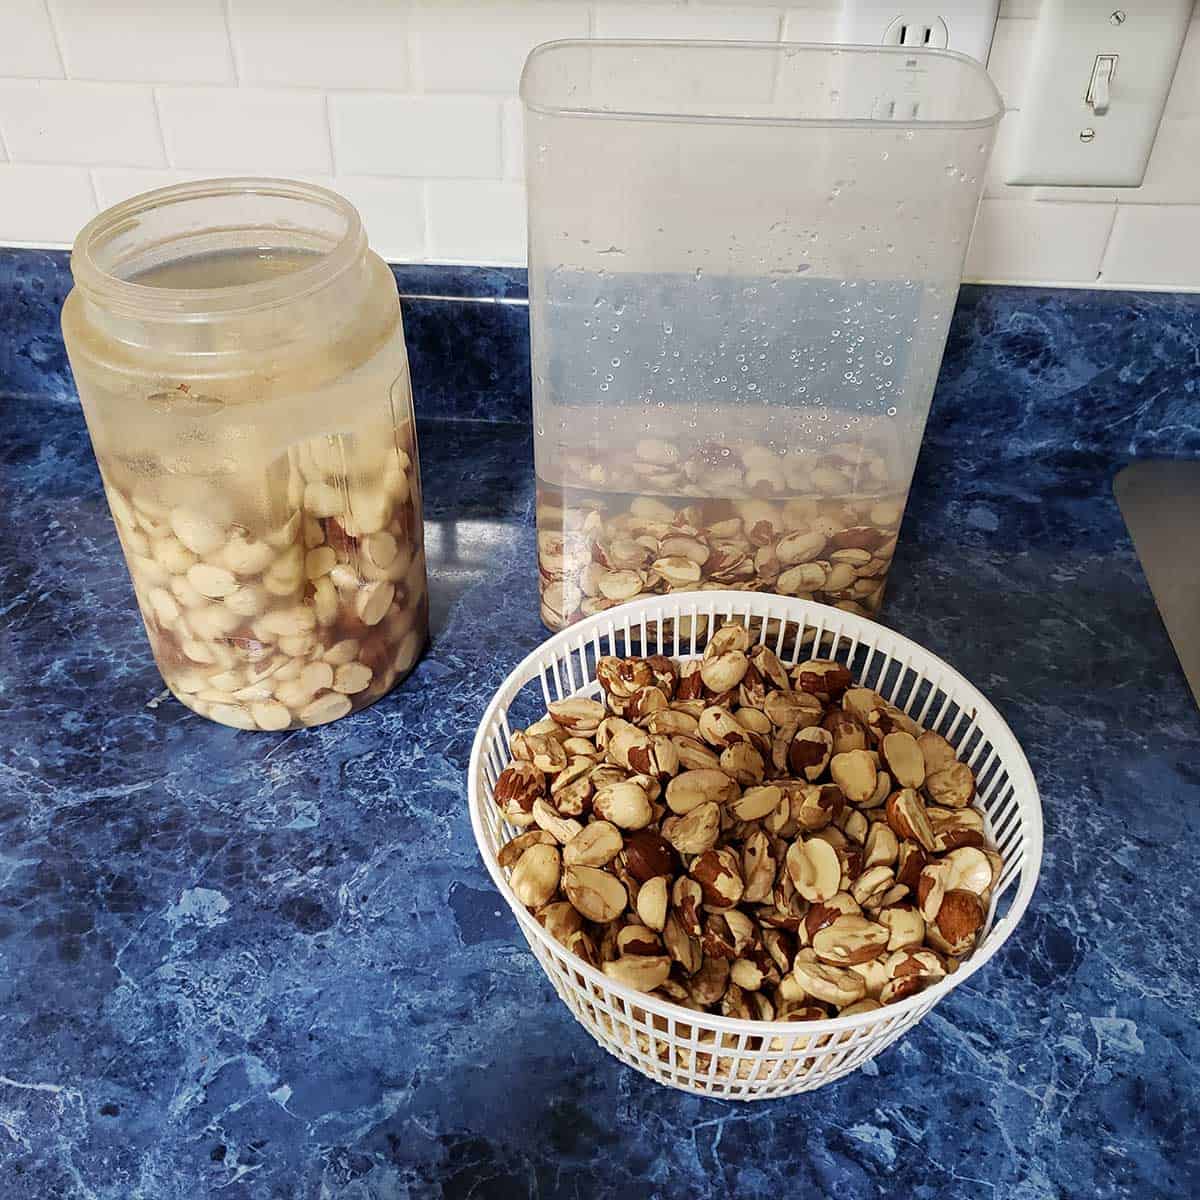 Soaking the acorn nuts in water for 5 days